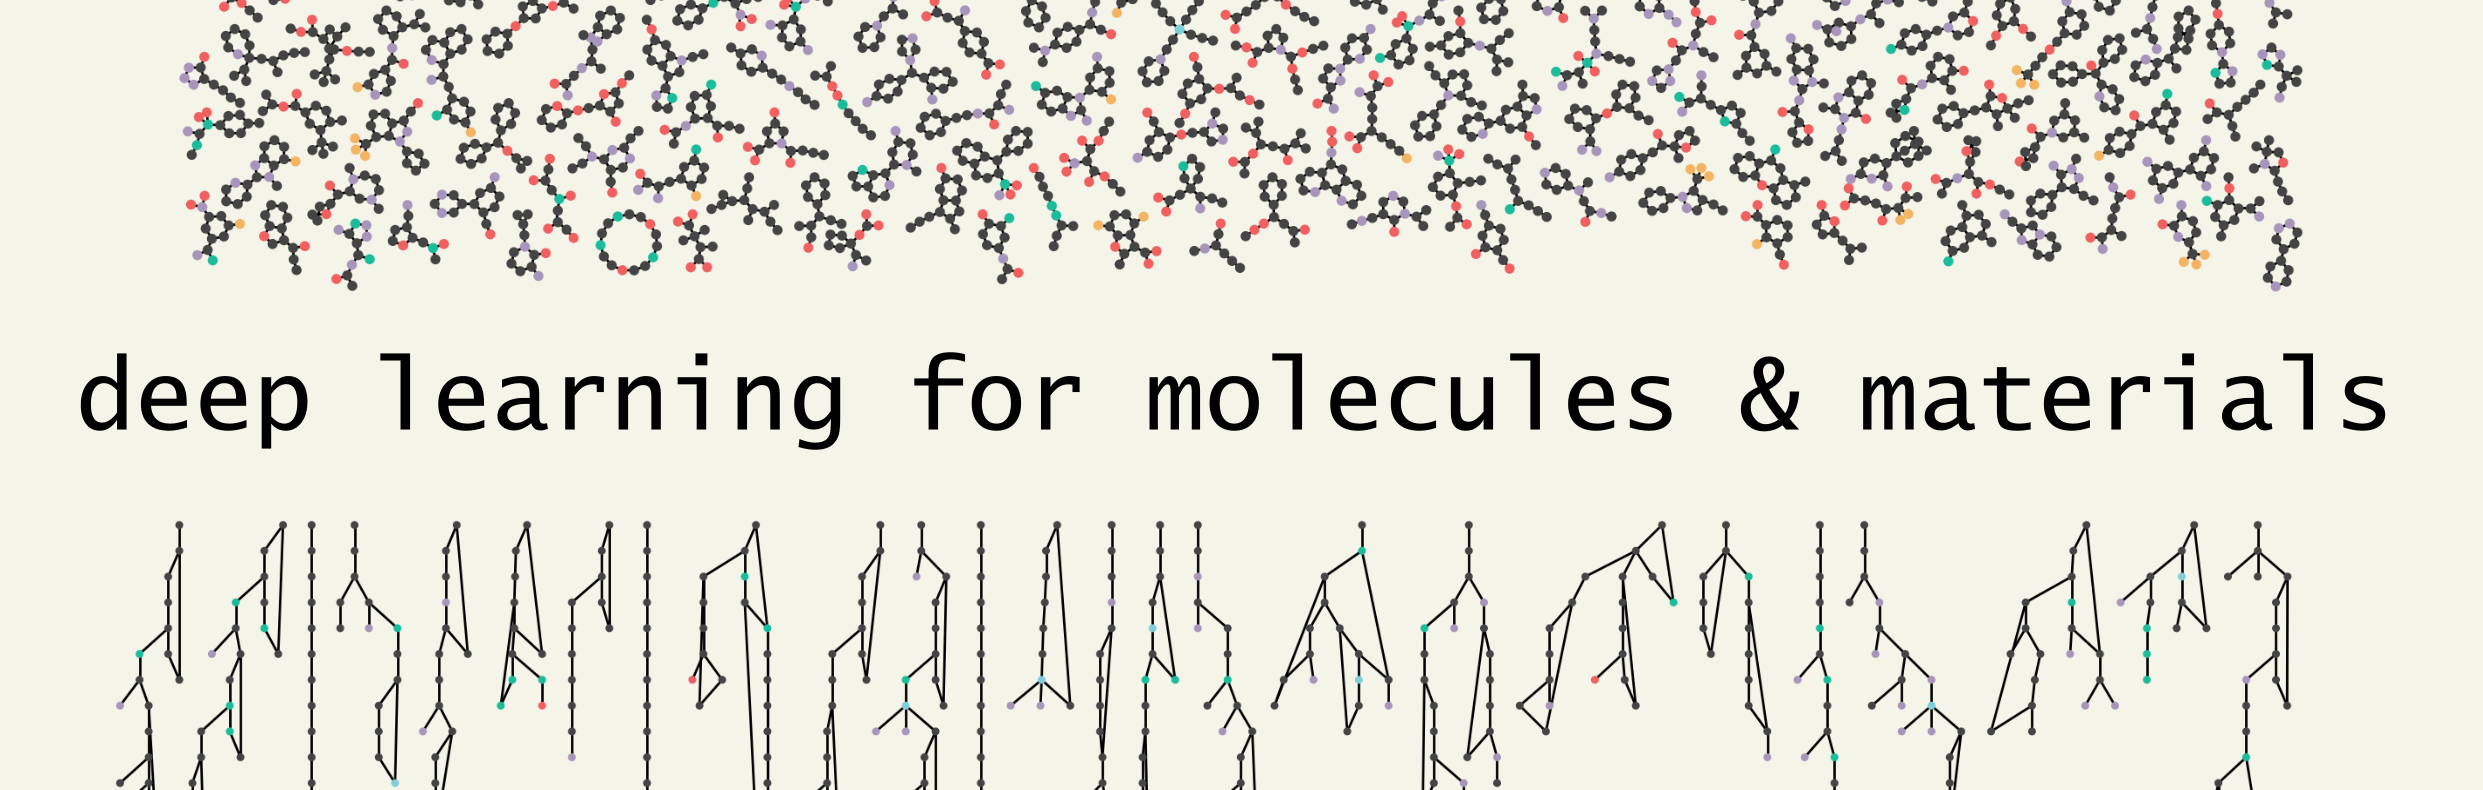 Header image showing molecules plotted in two different ways